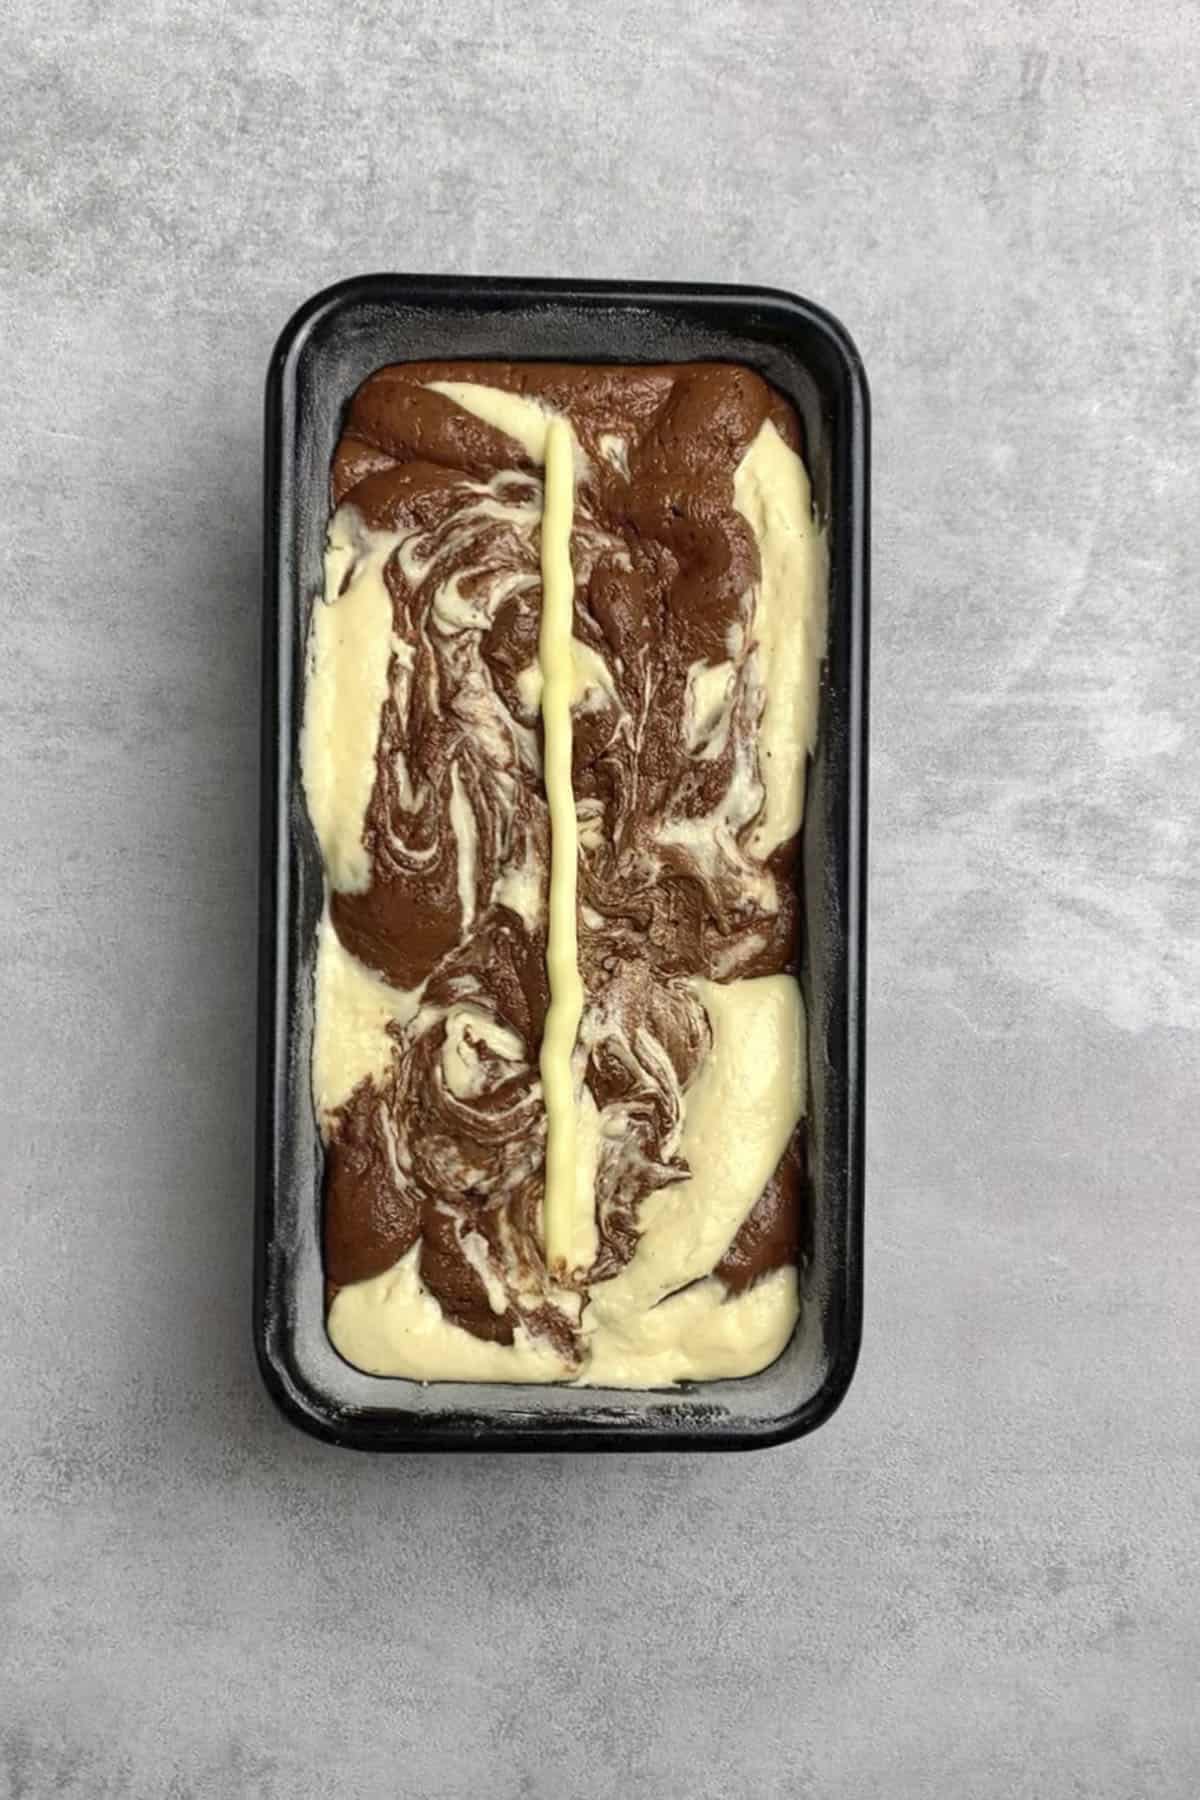 Marble loaf cake process